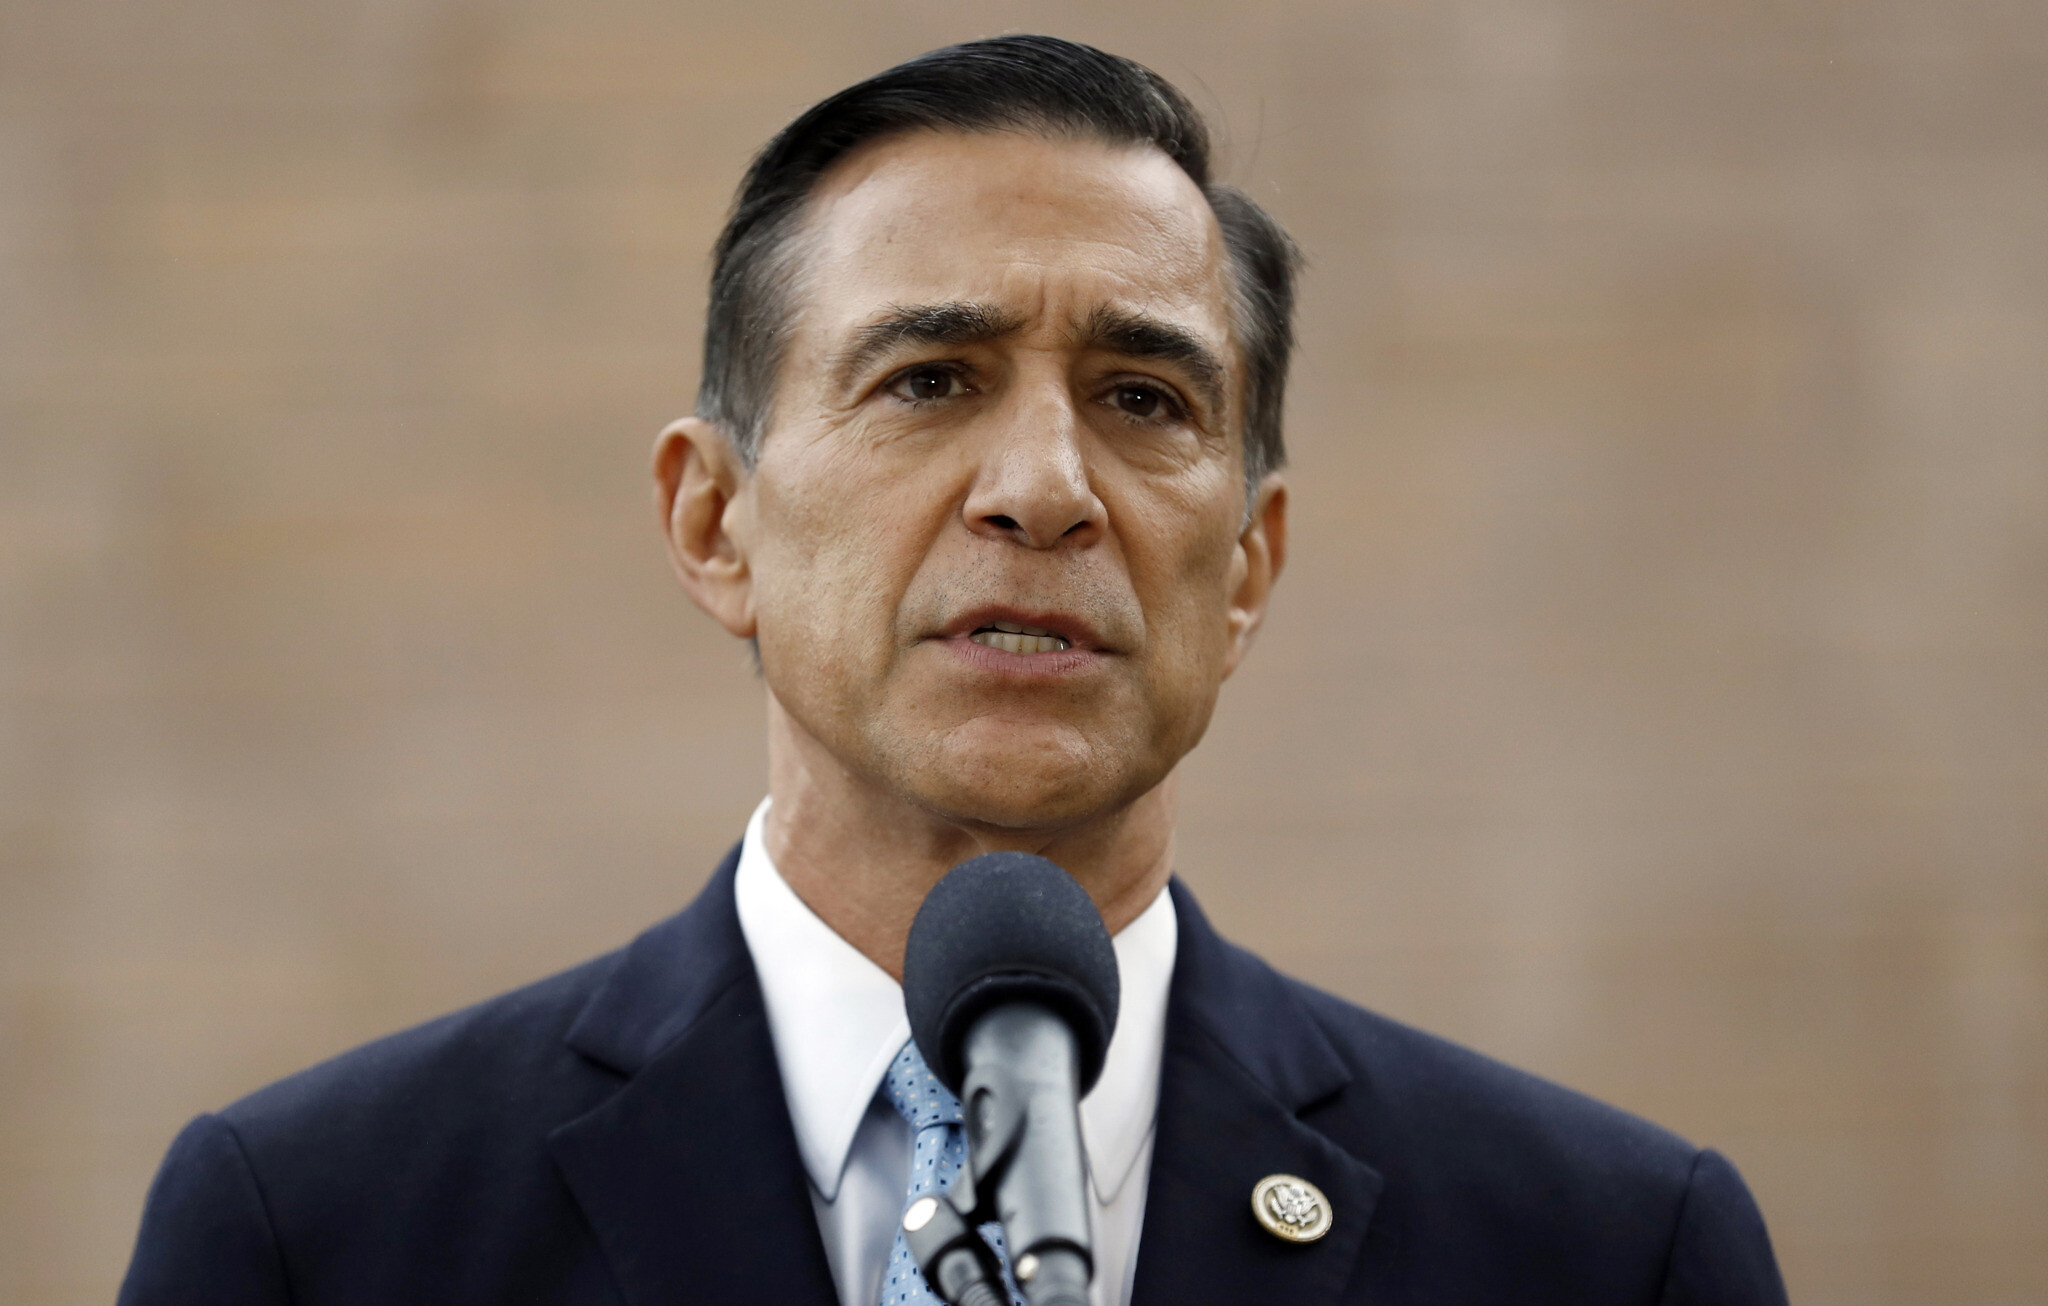 Darrell Issa headed back to Congress after defeating Ammar Campa-Najjar The Times of Israel